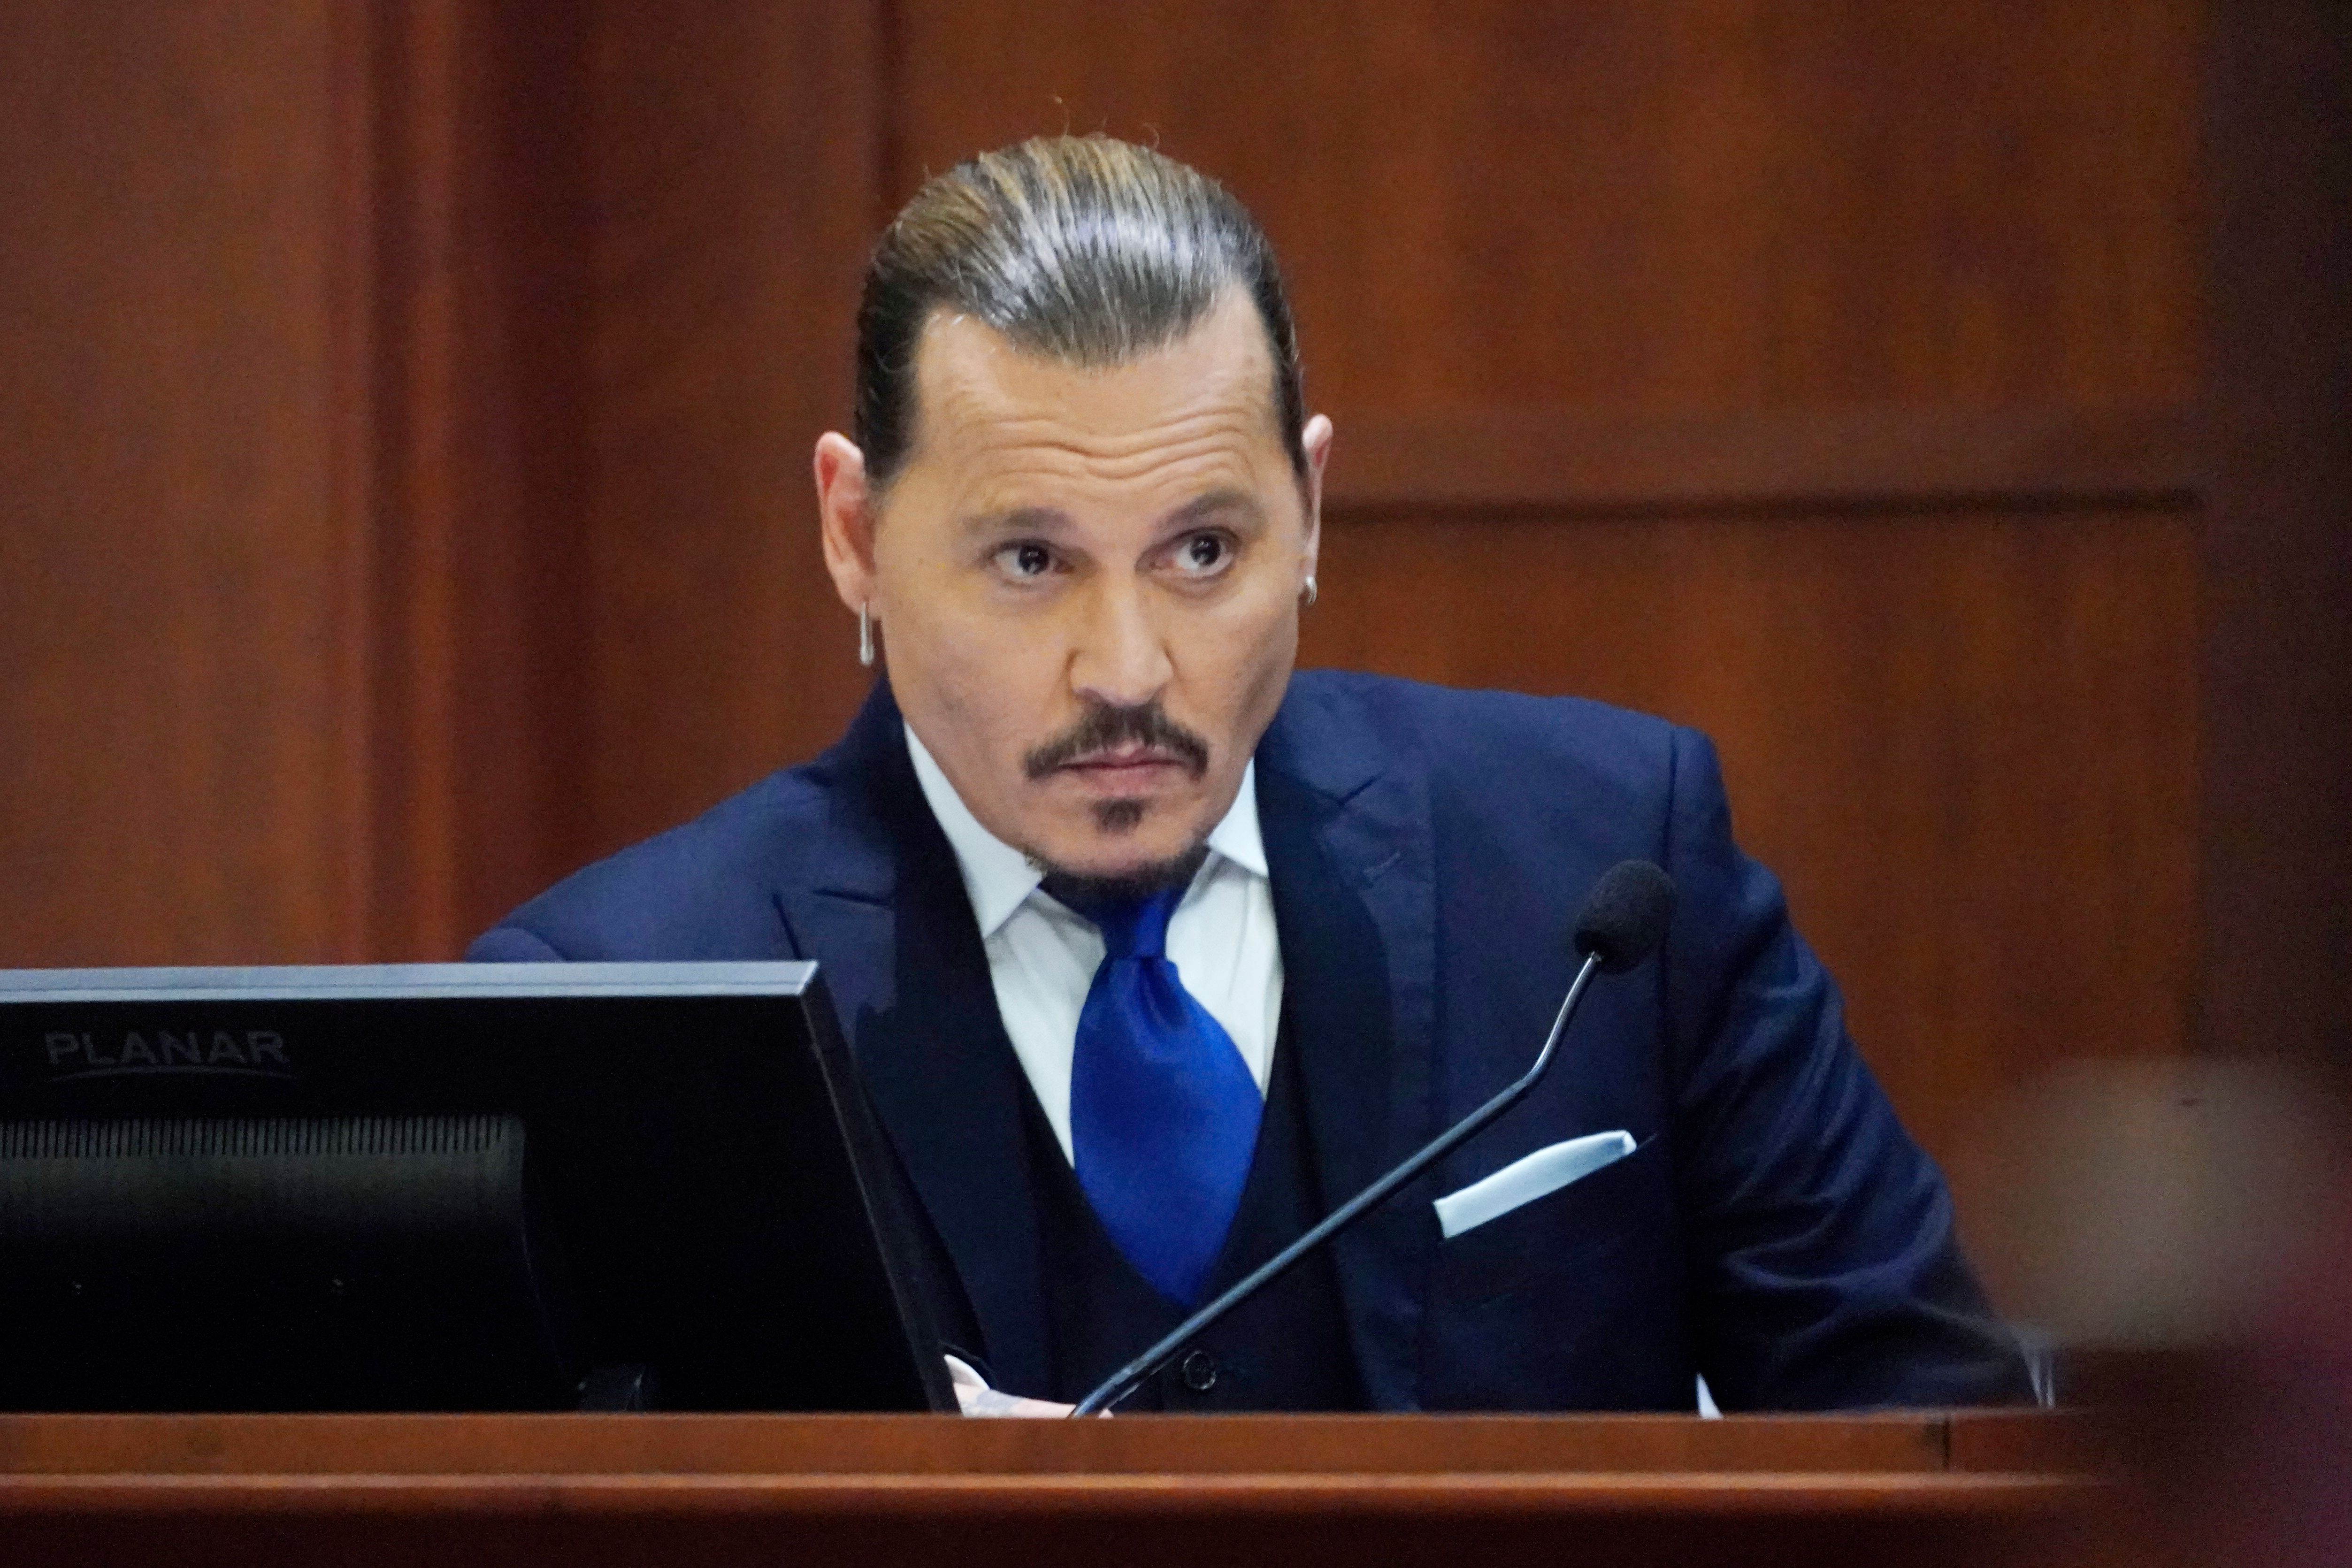 Johnny Depp sits to testify in a defamation case against his ex-wife Amber Heard